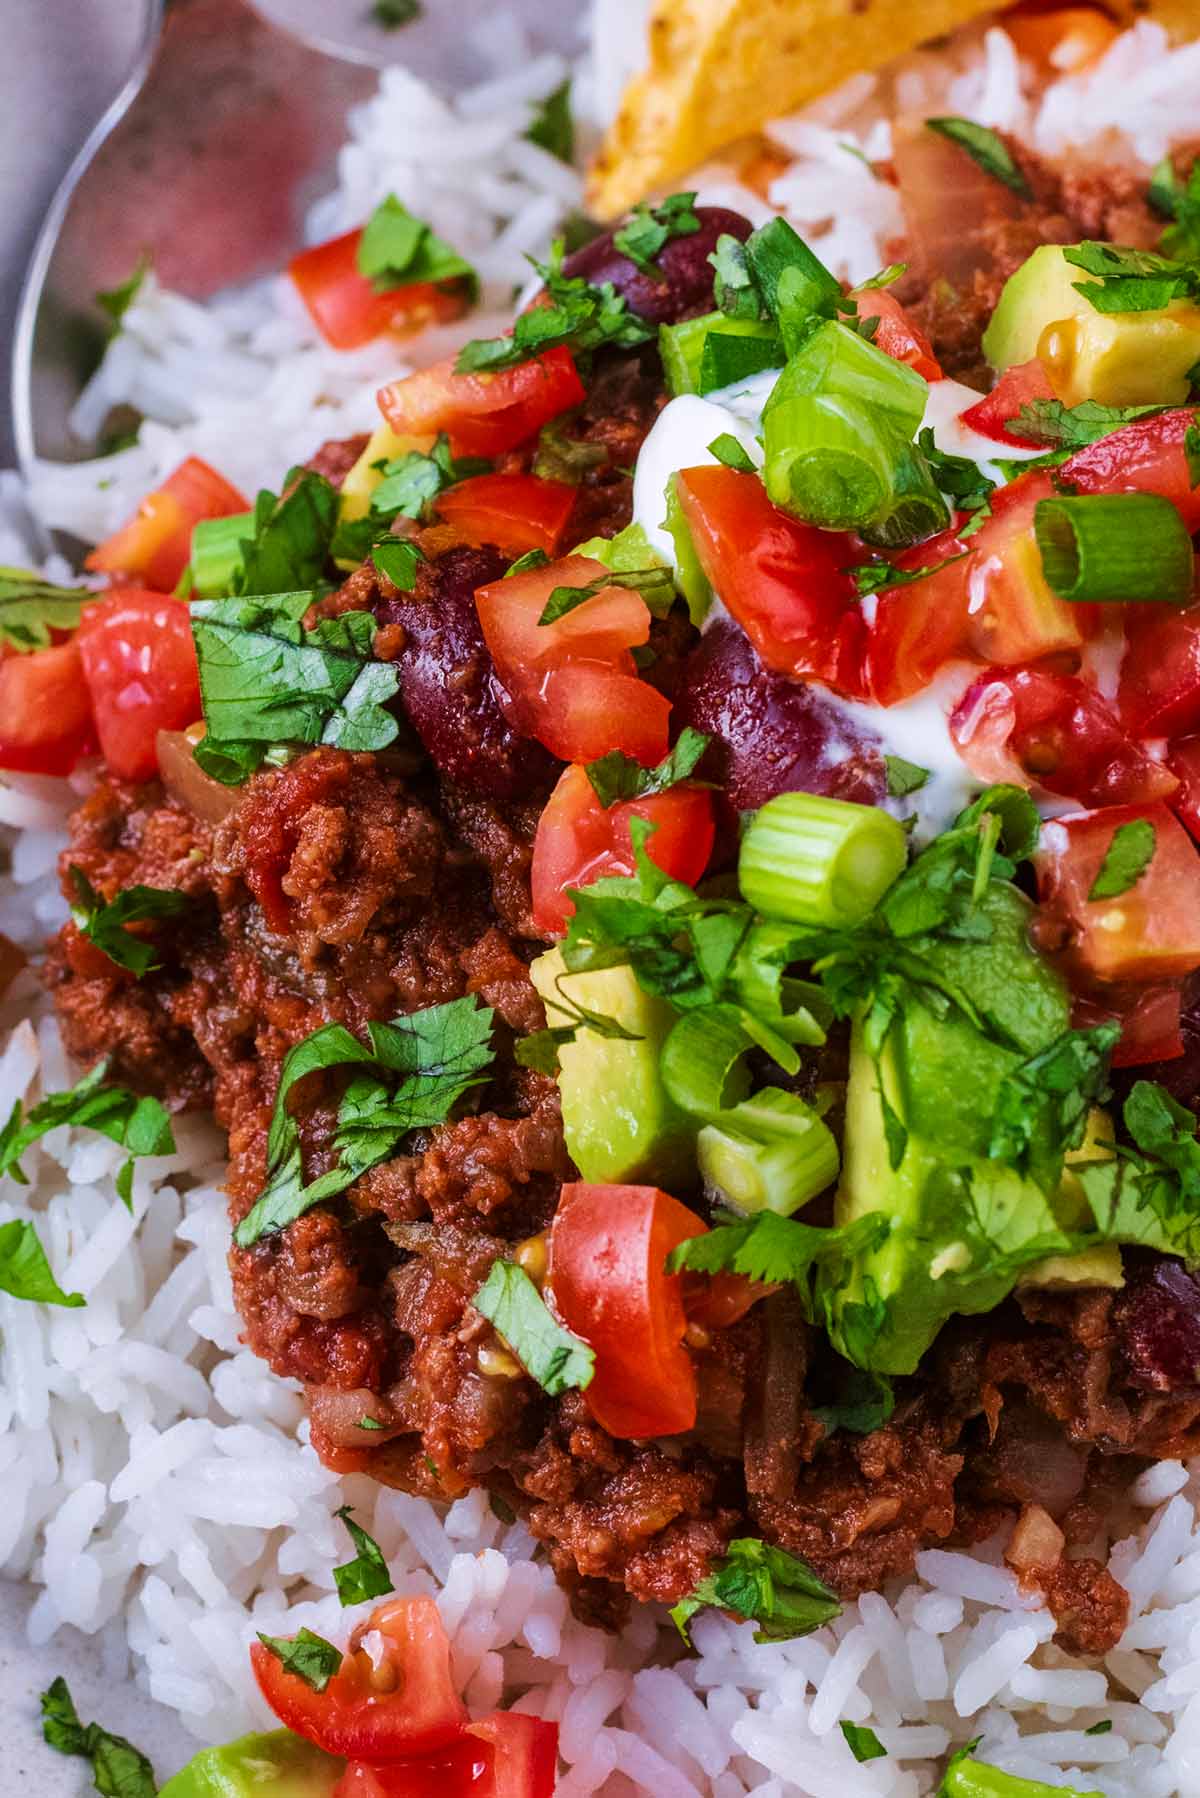 Beef chilli topped with chopped fresh tomatoes, diced avocado and coriander leaves.